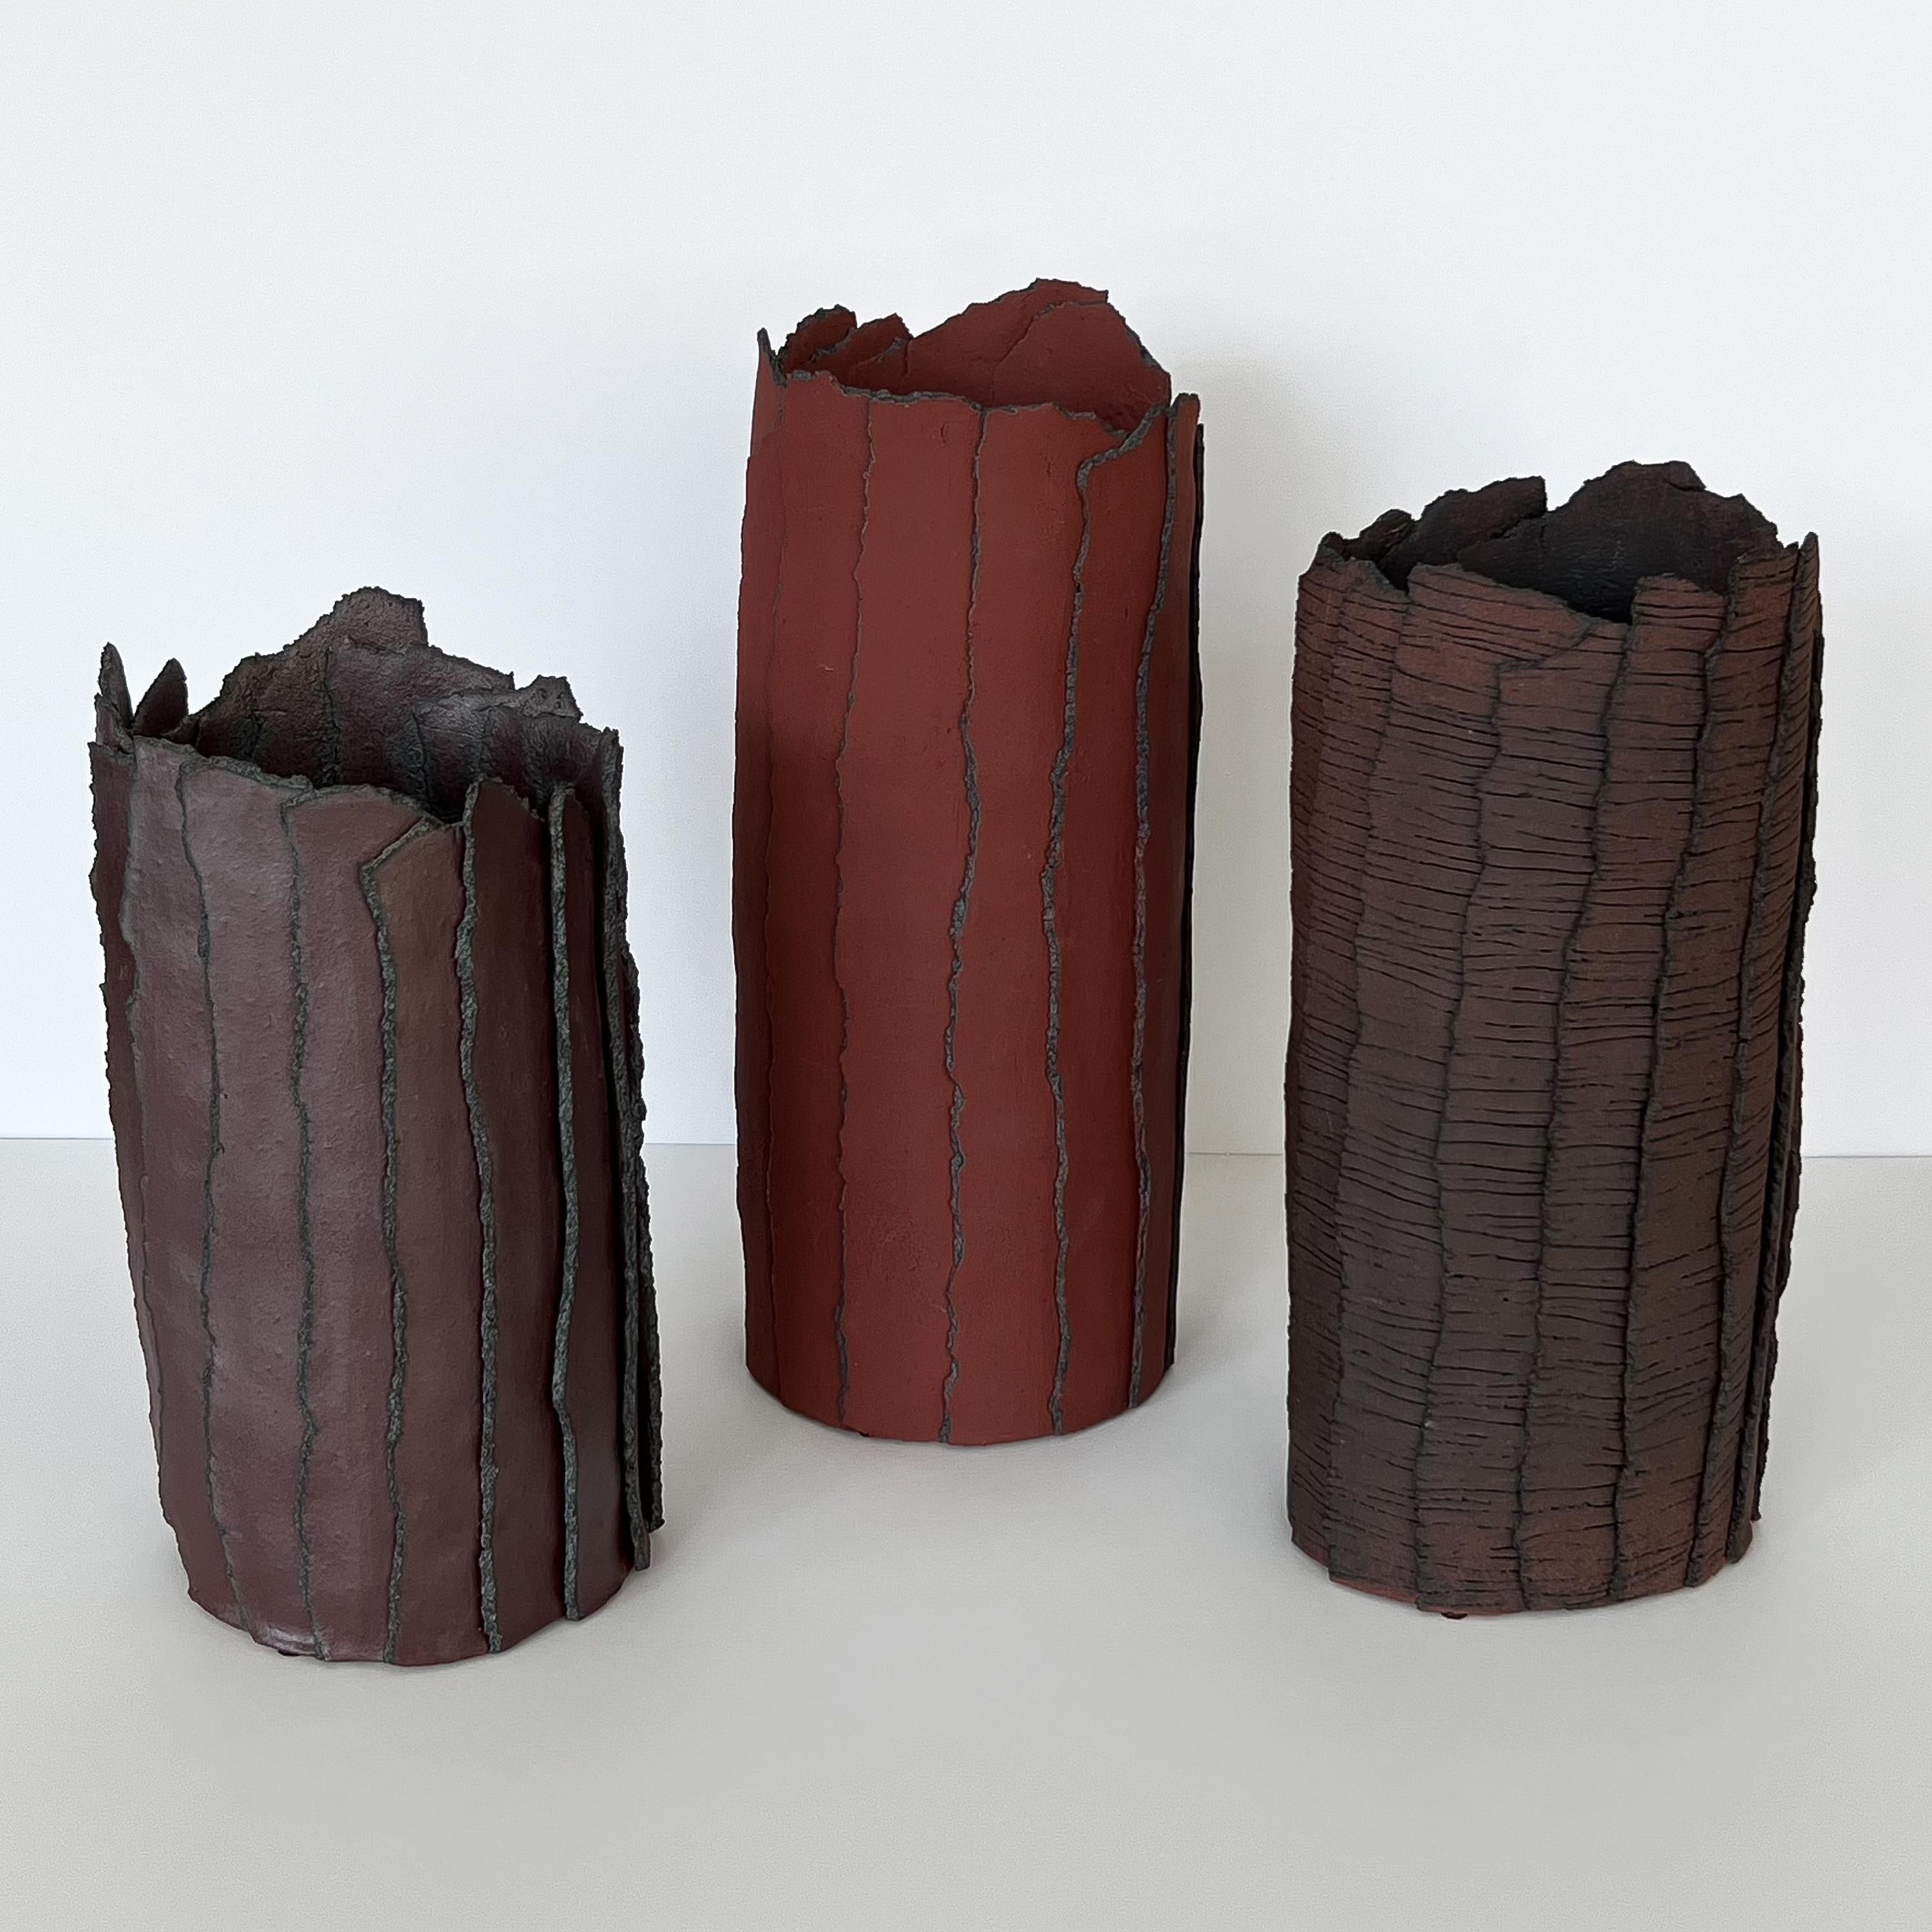 Set of three Brutalist abstract ceramic cylinder vases / sculptures with texture, Belgium circa Late 20th Century. Slab style cylindrical shaped vase sculptures with abstract organic bark motif. Layered vertical slab construction with glazed surface